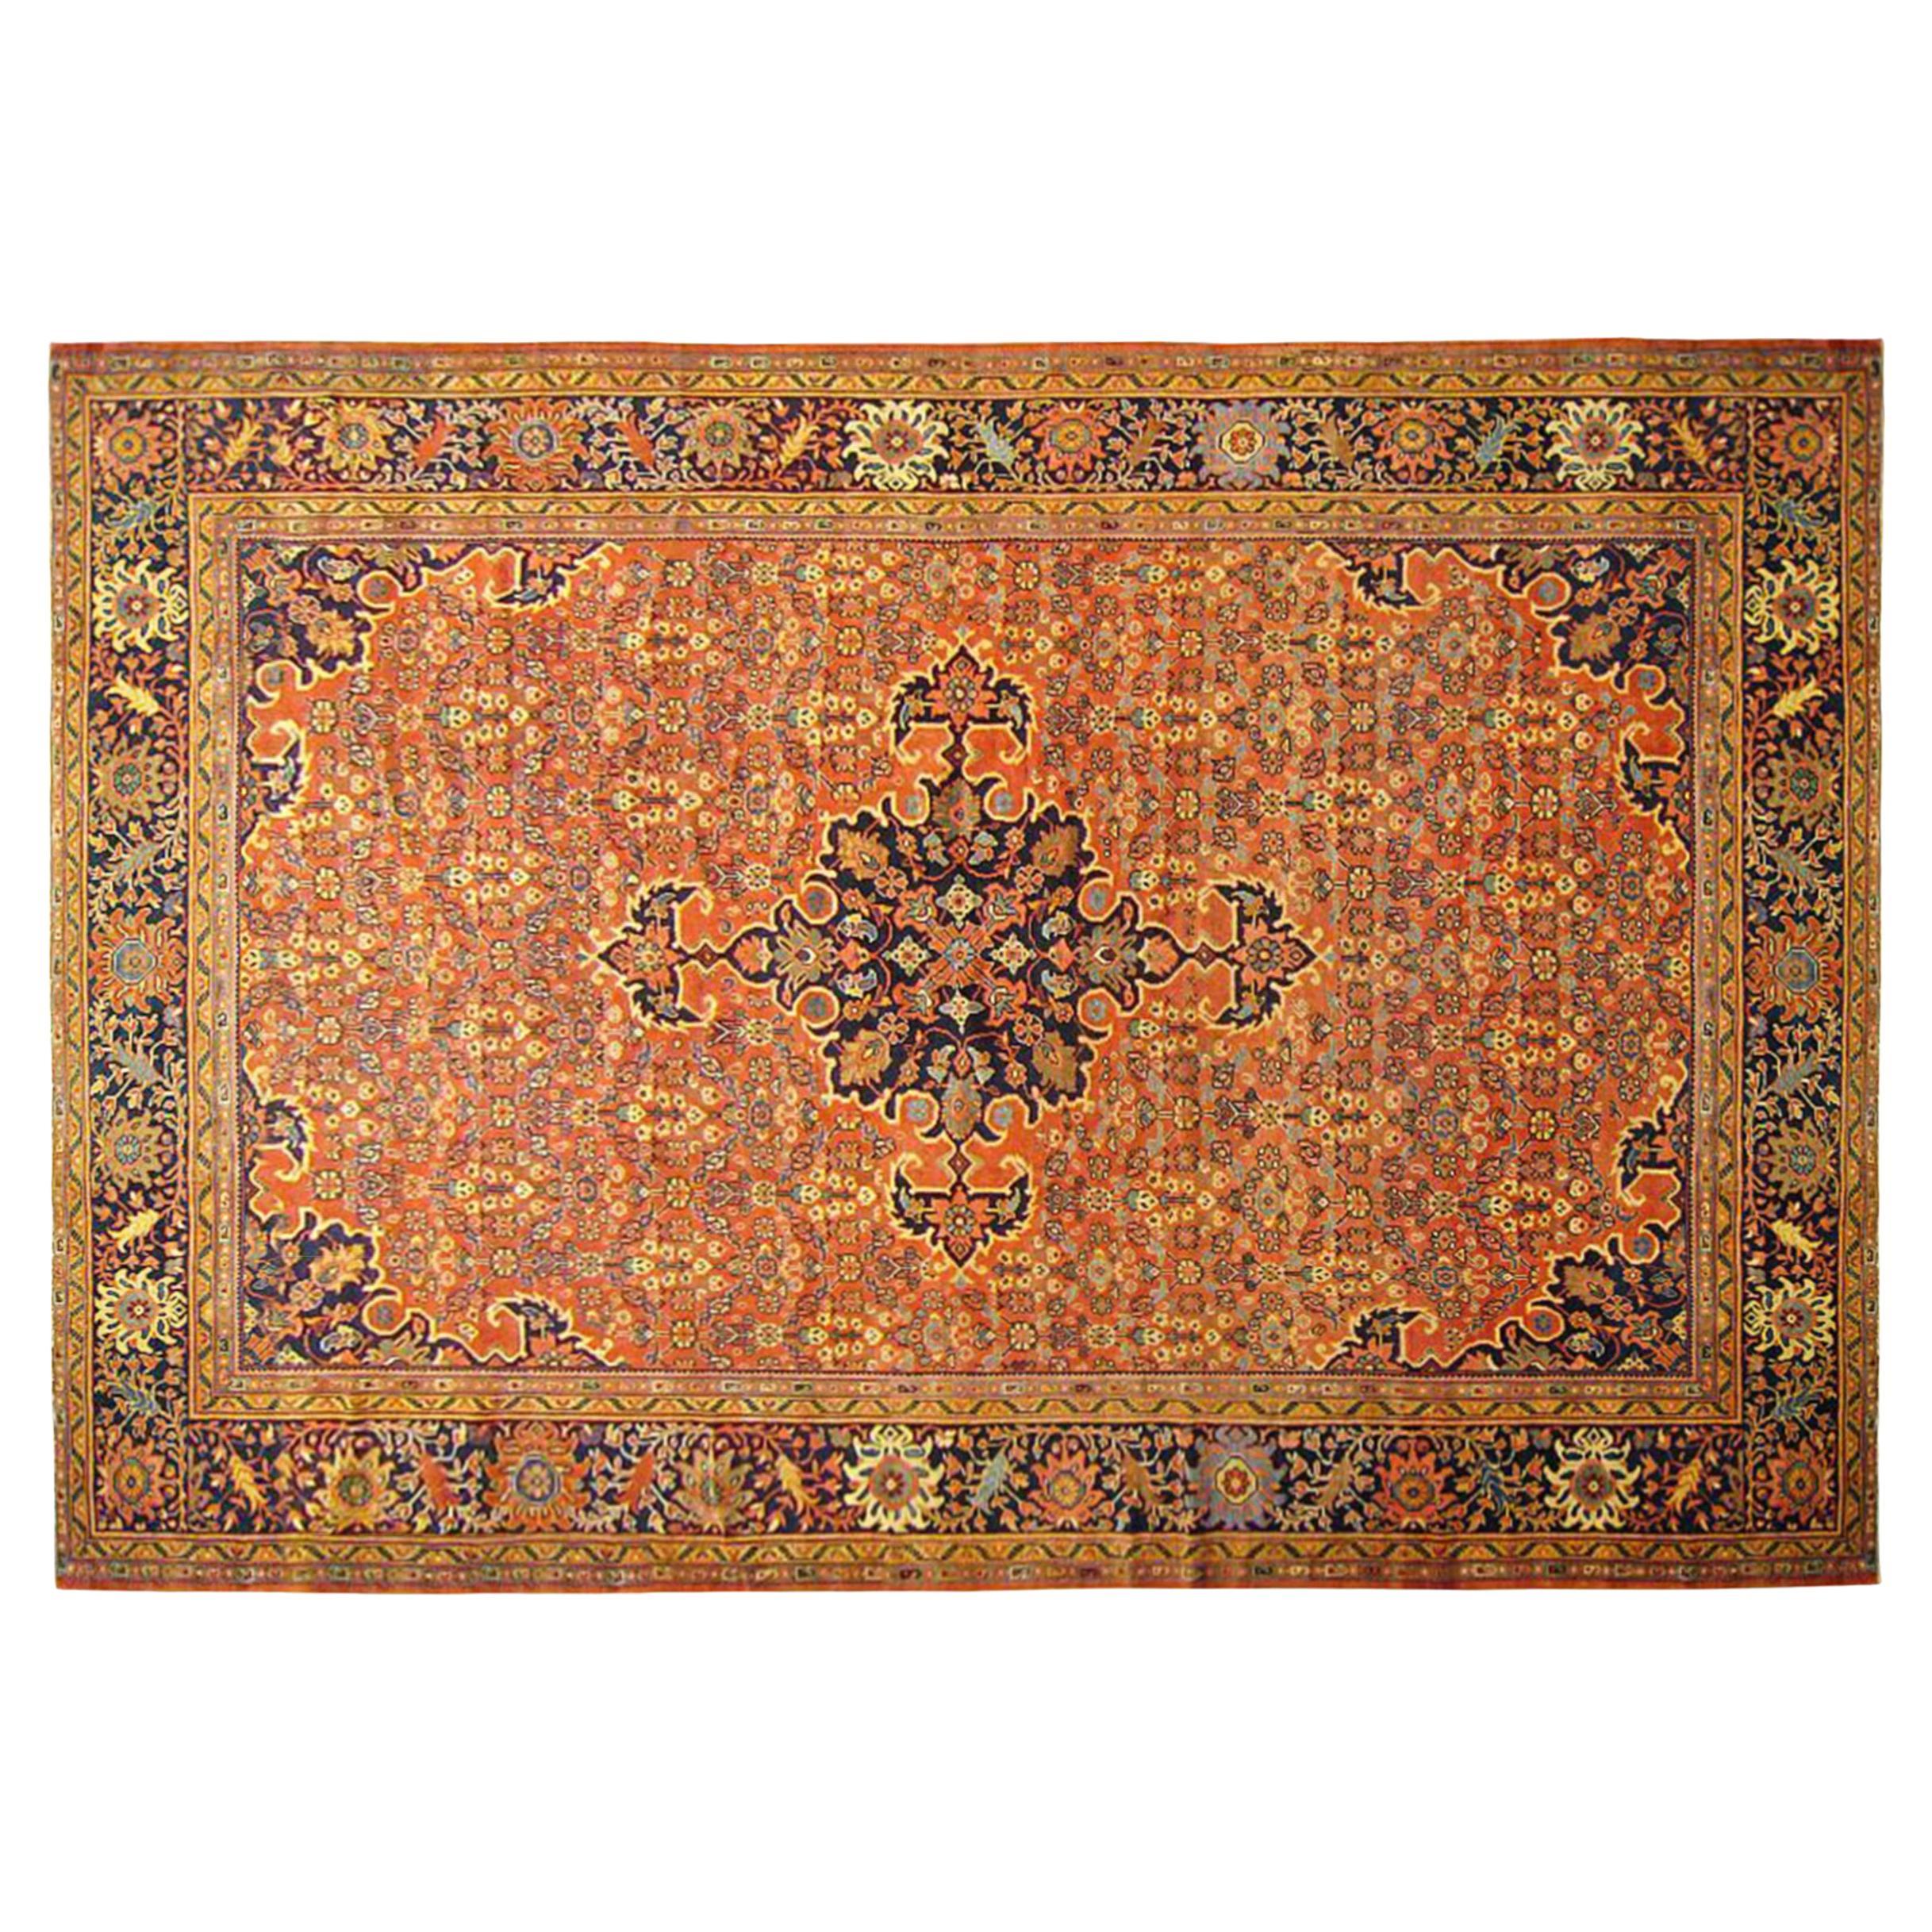 Antique Persian Sultanabad Oriental Carpet, Room Size, with Central Medallion